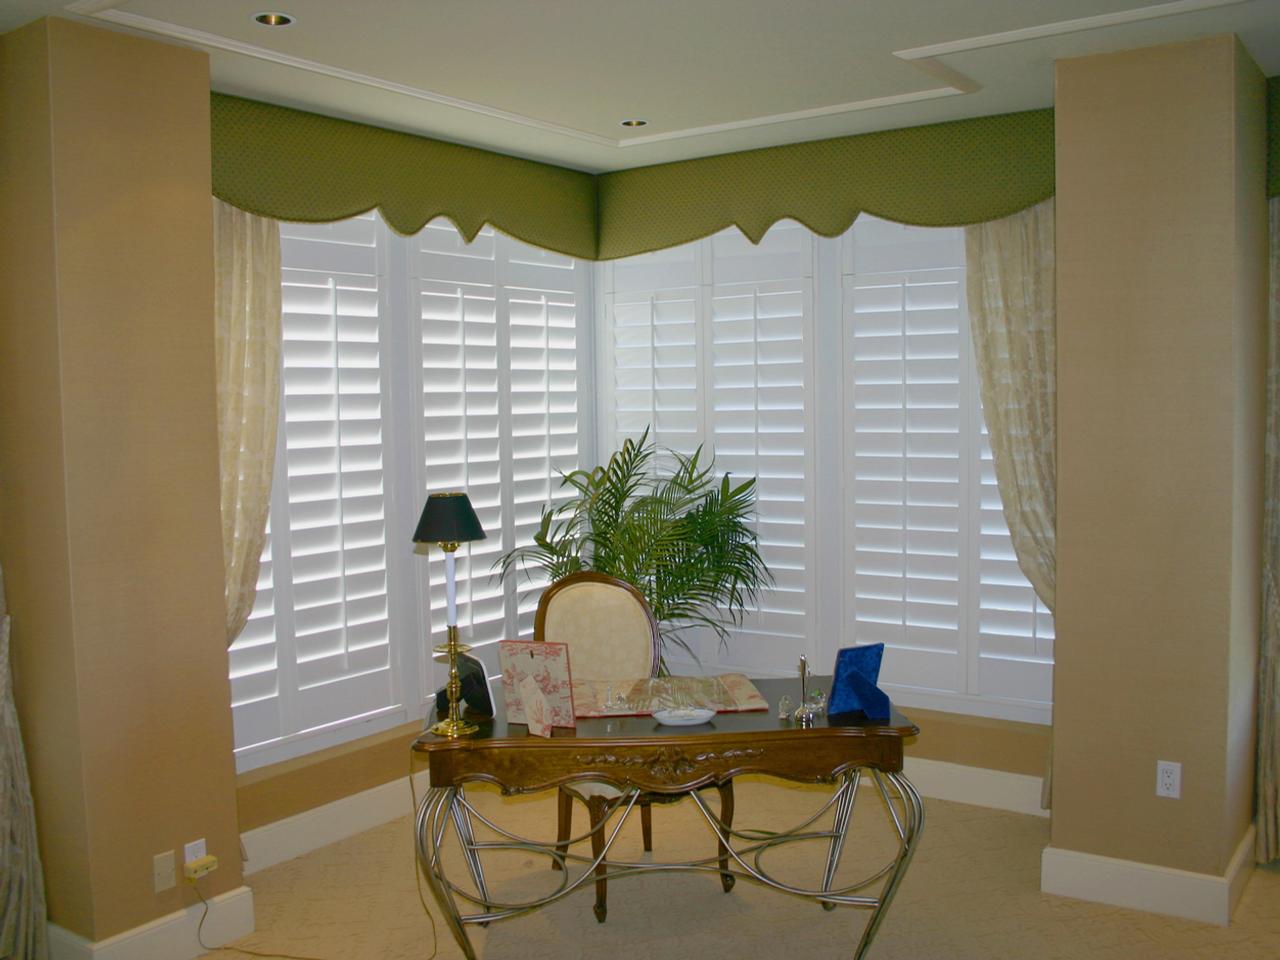 Home office with shutters on the corner windows